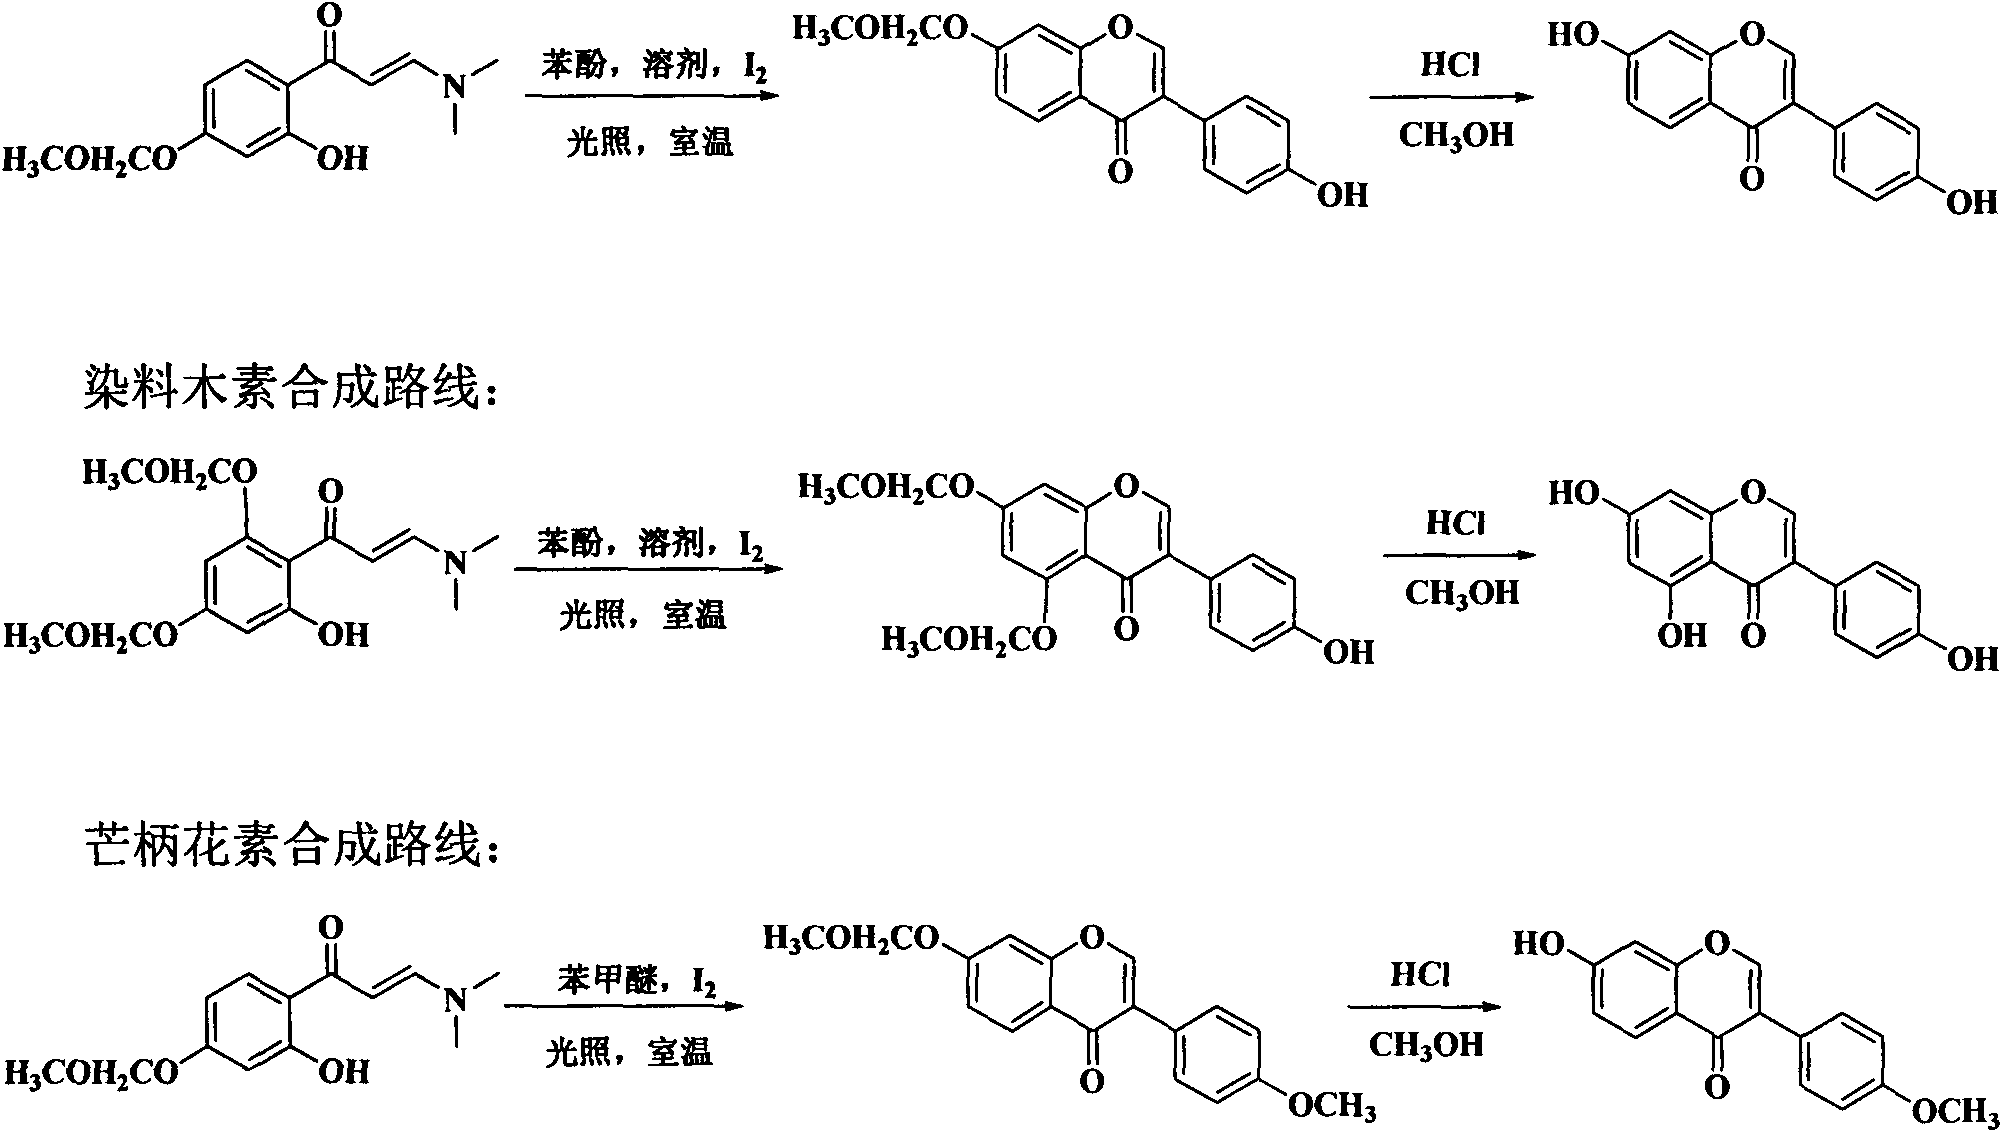 Photochemical reaction synthesis for isoflavones